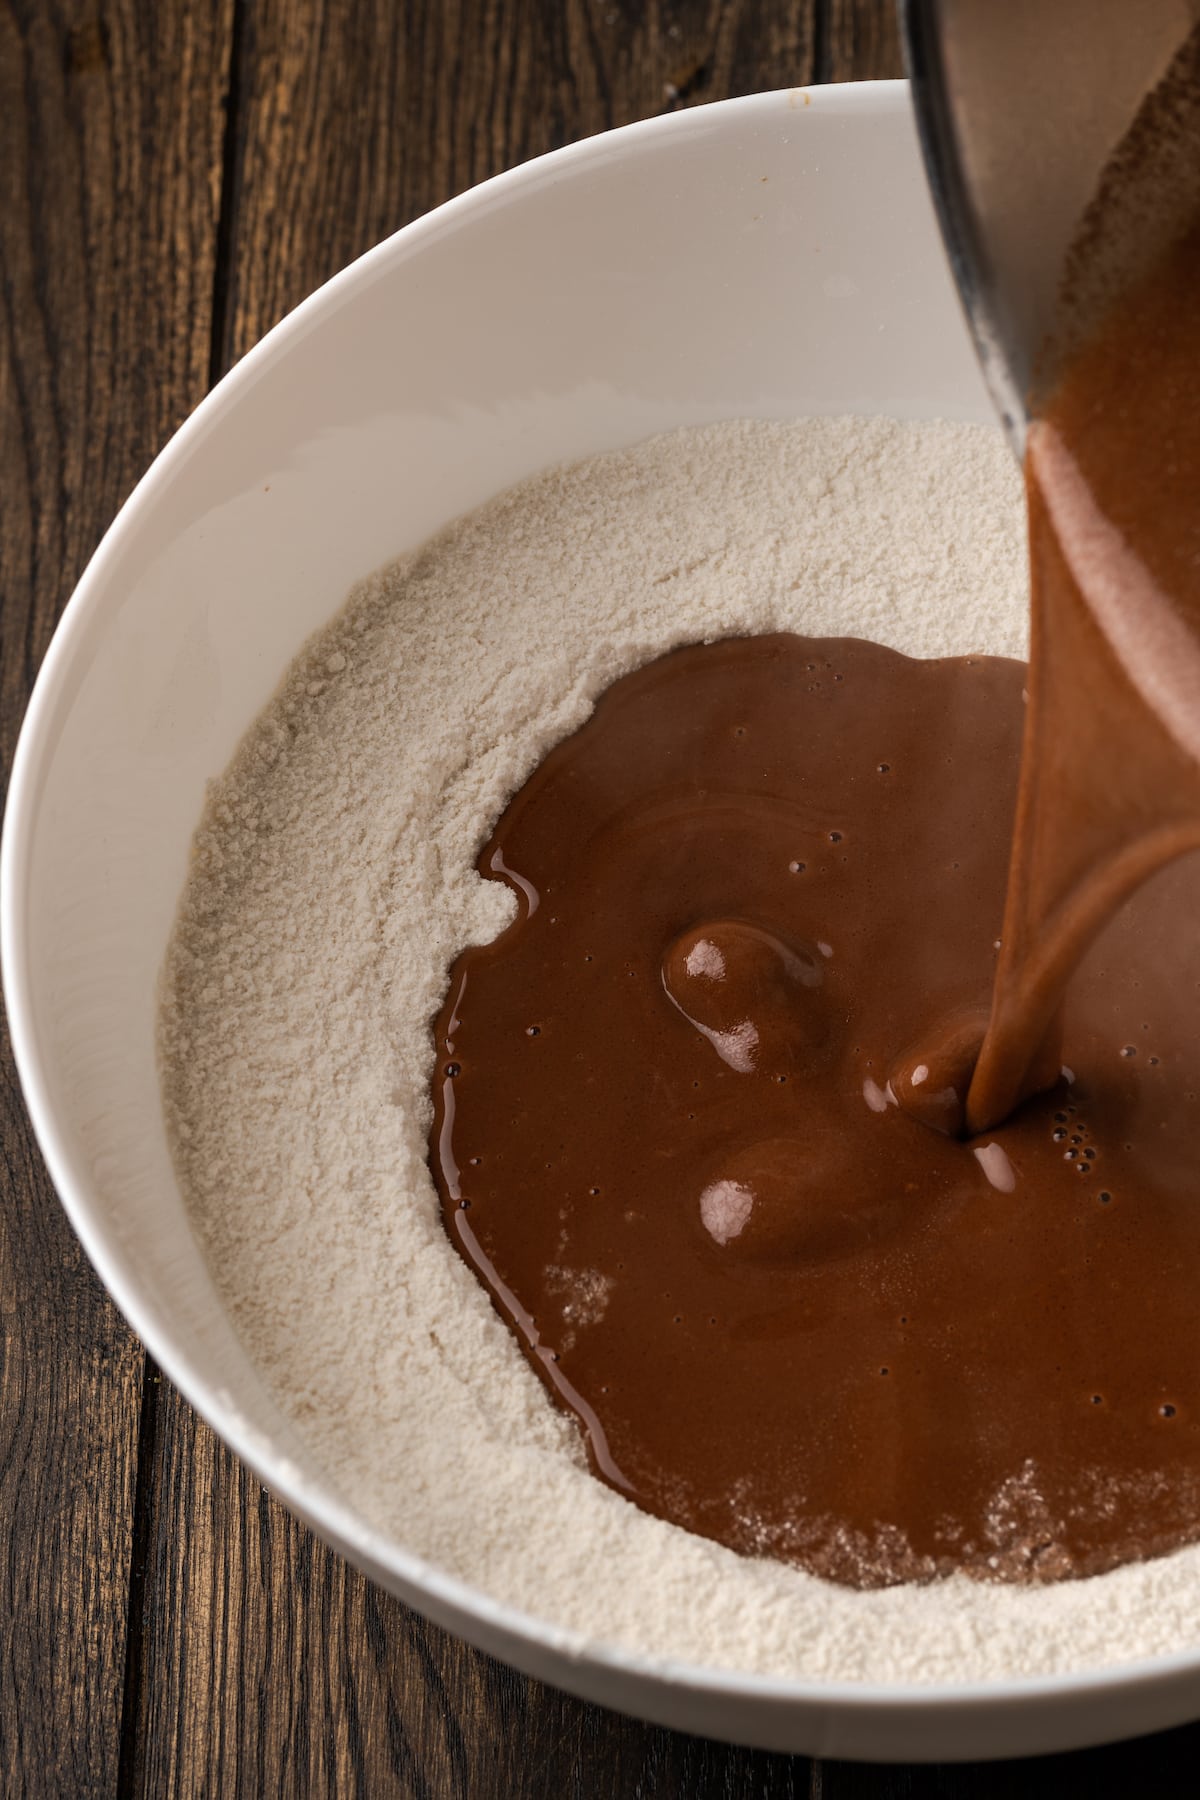 Hot butter mixed with cocoa is poured into a bowl of dry cake batter ingredients.